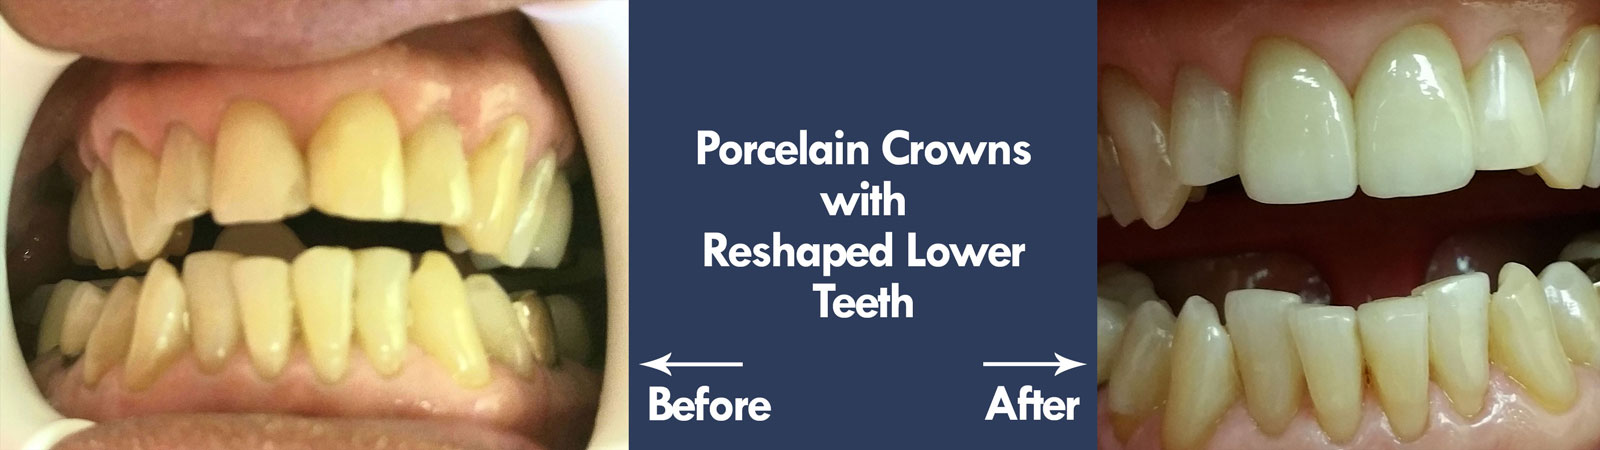 Before & After Porcelain Crowns | Livermore Dentists